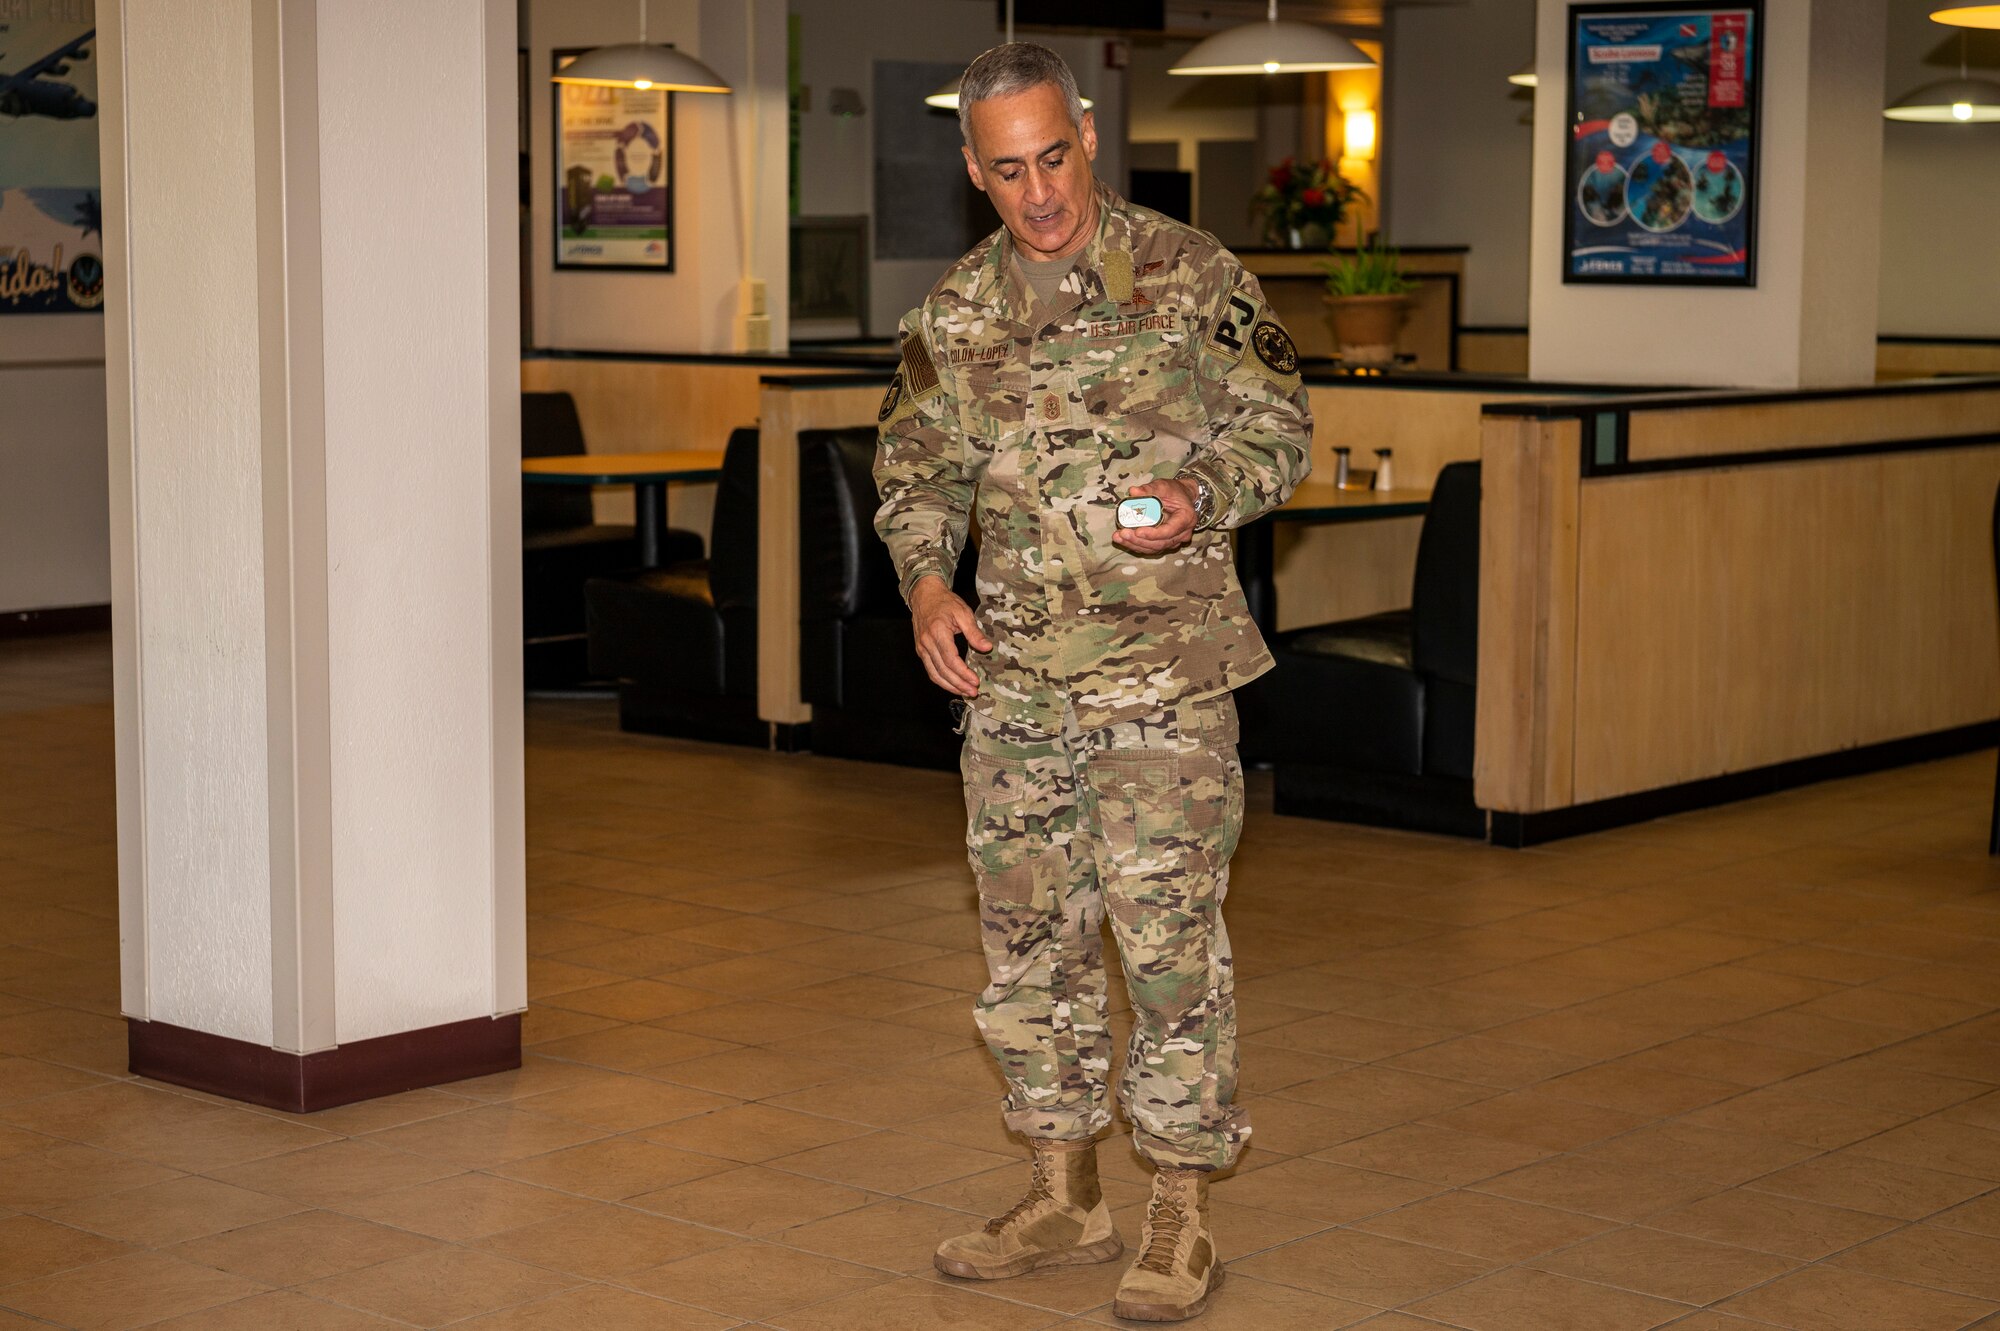 SEAC Ramón Colón-López, Senior Enlisted Advisor to the Chairman of the Joint Chiefs of Staff, explains the meaning of his coin to Airmen at the Reef Dining Facility Aug. 5, 2022 at Hurlburt Field, Florida. During his visit, the SEAC attended the Talon 13 Remembrance Ceremony, visited AFSOC Headquarters and 24th Special Operations Wing, had lunch with Airmen, and hosted an All-Call. The SEAC serves as the 4th Senior Enlisted Advisor to the Chairman of the Joint Chiefs of Staff, the most senior enlisted service member, by position, in the United States Armed Forces, and the principal military advisor to the Chairman on all matters involving joint and combined total force integration, utilization, health of the force, and joint development for enlisted personnel.